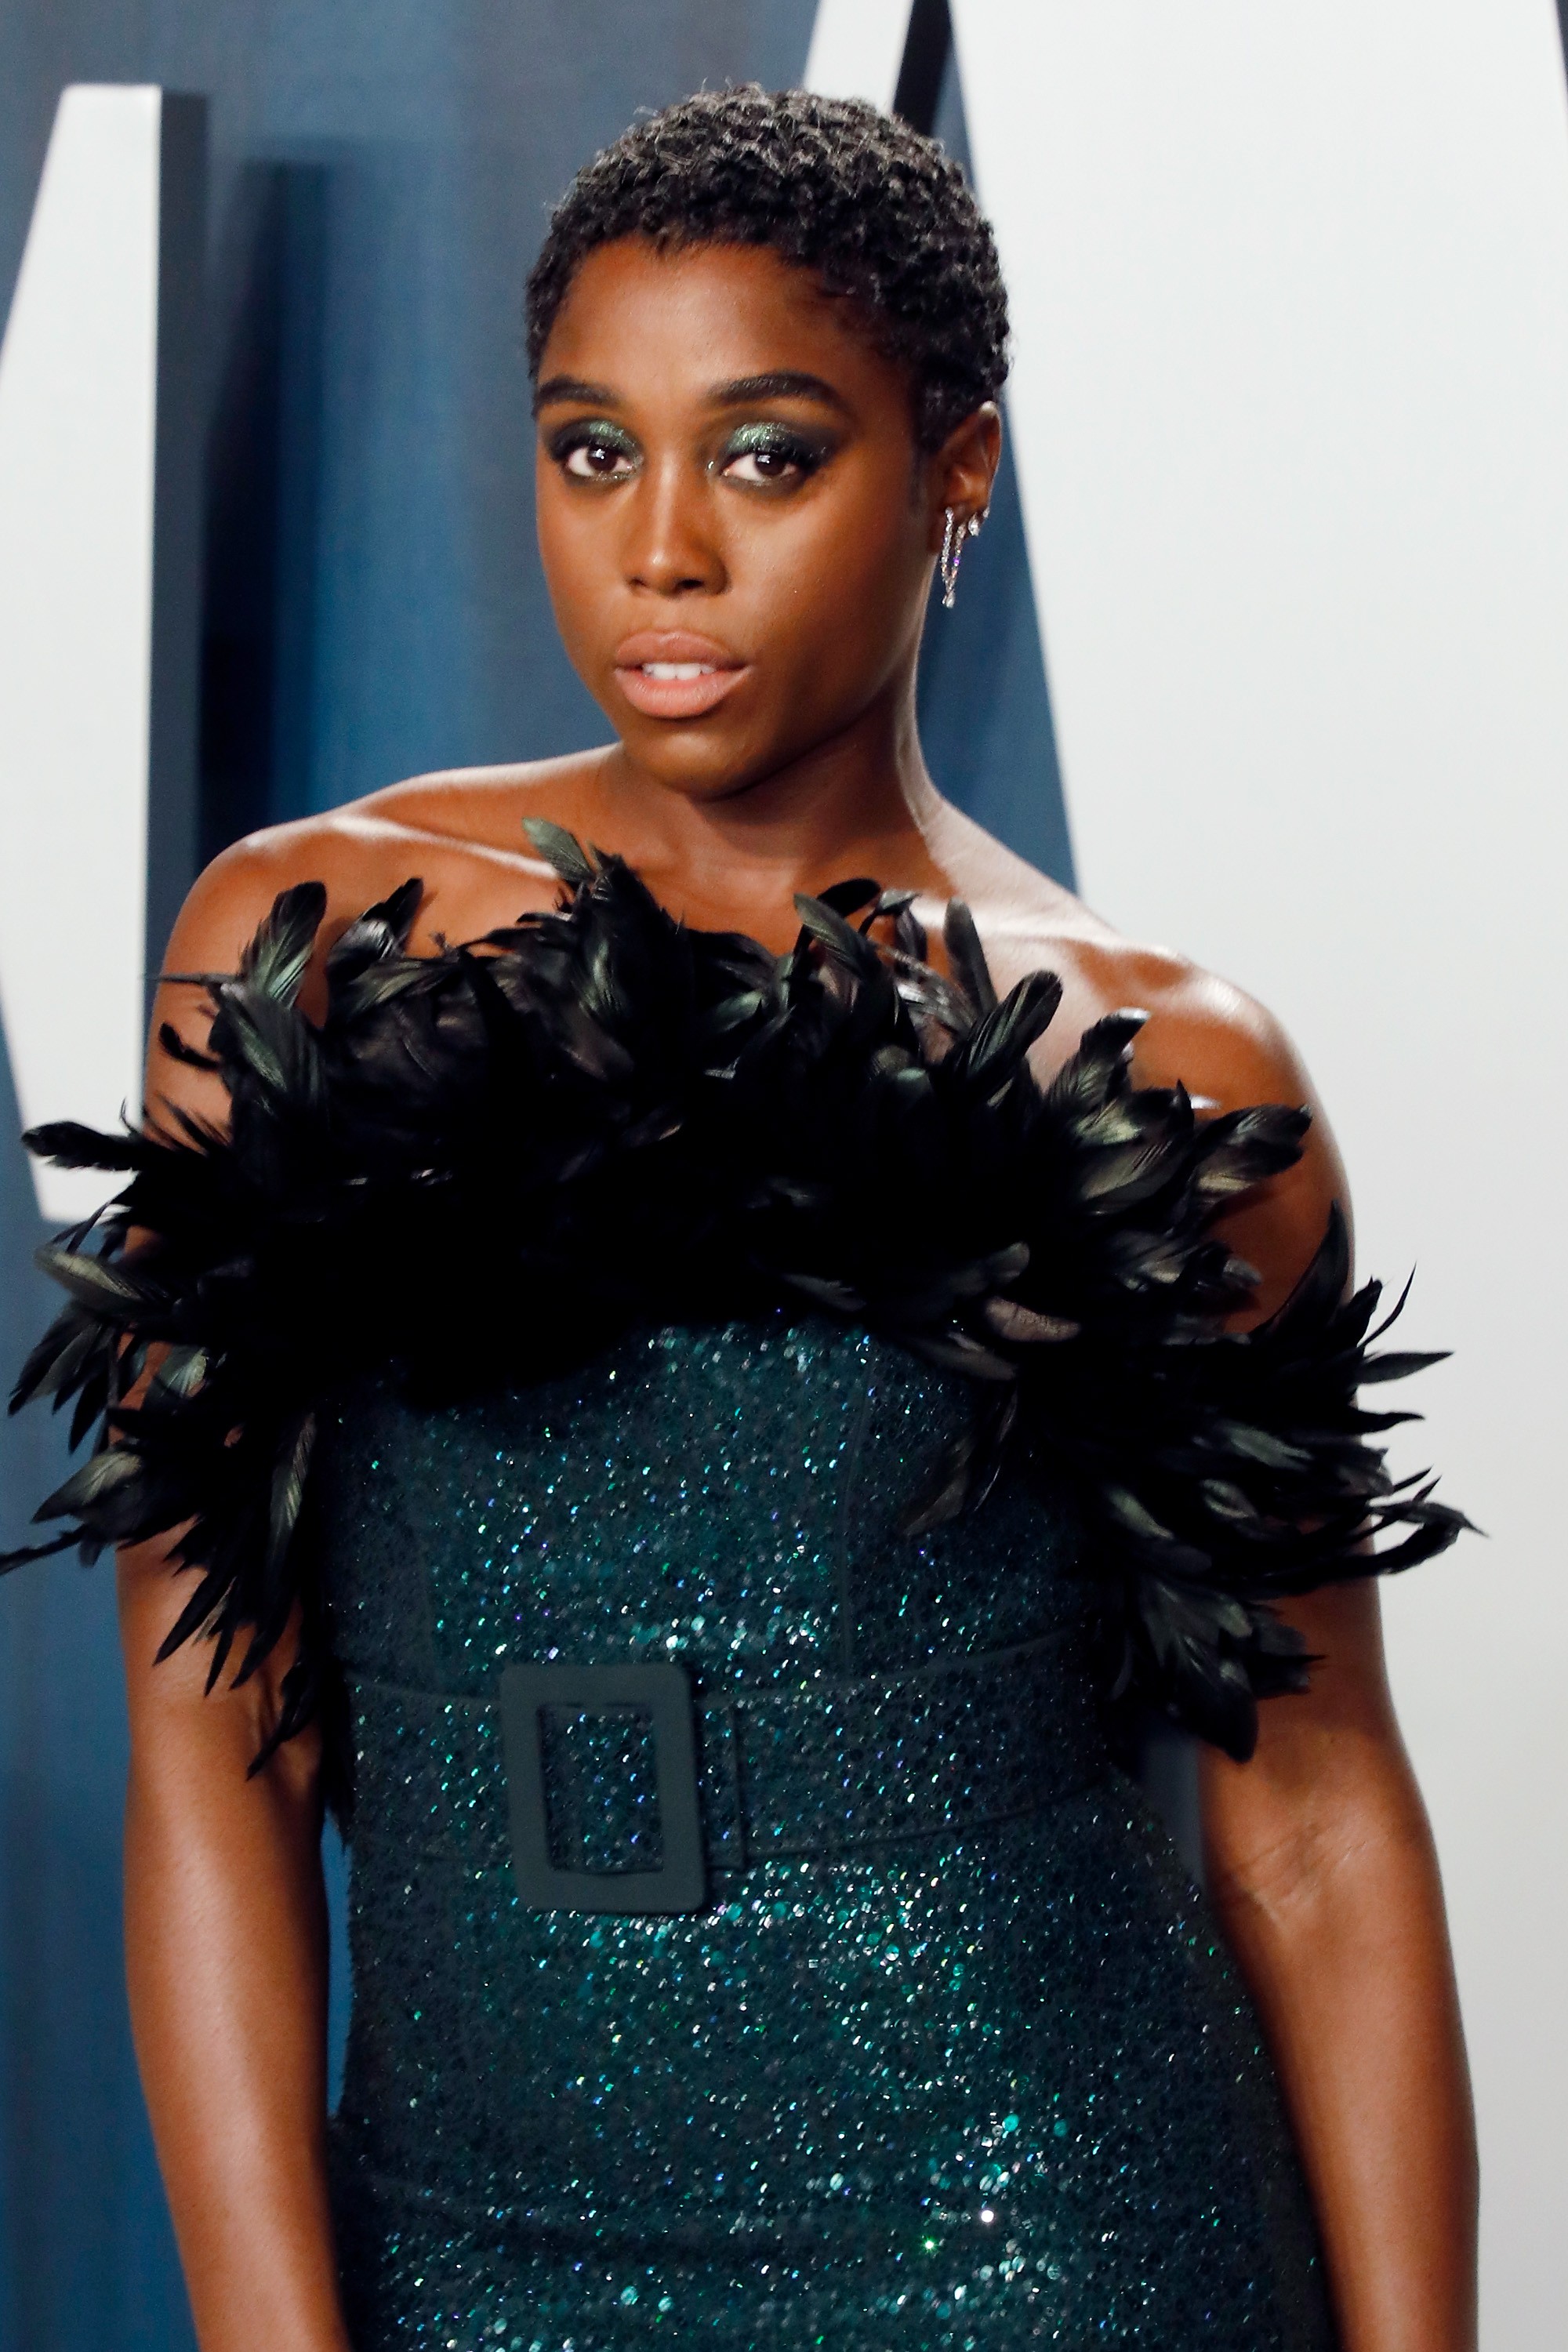 BEVERLY HILLS, CALIFORNIA - FEBRUARY 09: Lashana Lynch attends the Vanity Fair Oscar Party at Wallis Annenberg Center for the Performing Arts on February 09, 2020 in Beverly Hills, California. (Photo by Taylor Hill/FilmMagic,) (Foto: FilmMagic,)